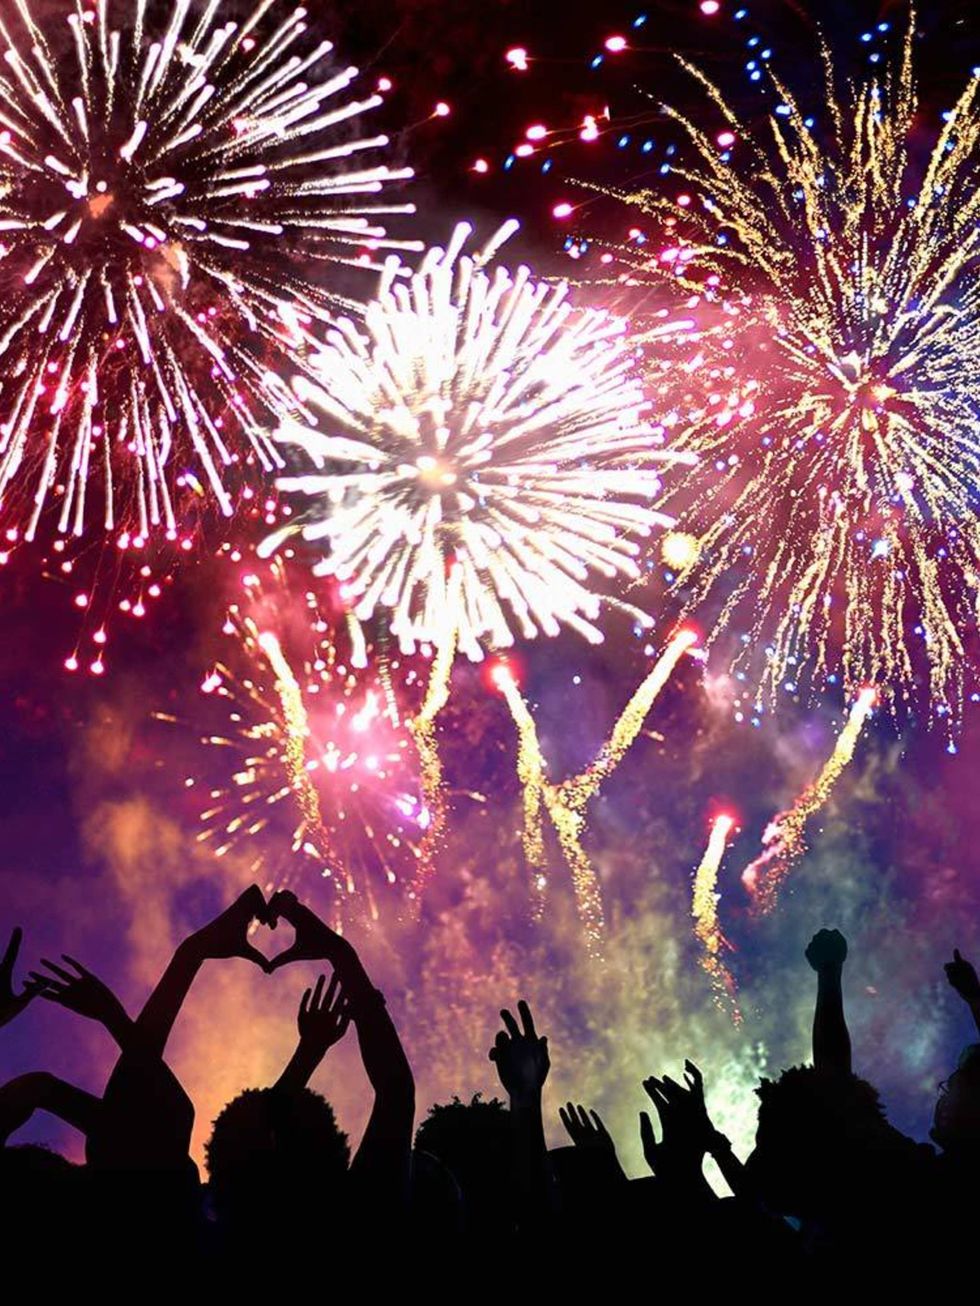 <p>EVENT: Fireworks Night</p>

<p>Remember, remember, the 5th of November And the 7th too, come to think of it. Because its that time of year again when we celebrate all things sparkly, whizzy and generally explodey  and London does it better than anyw